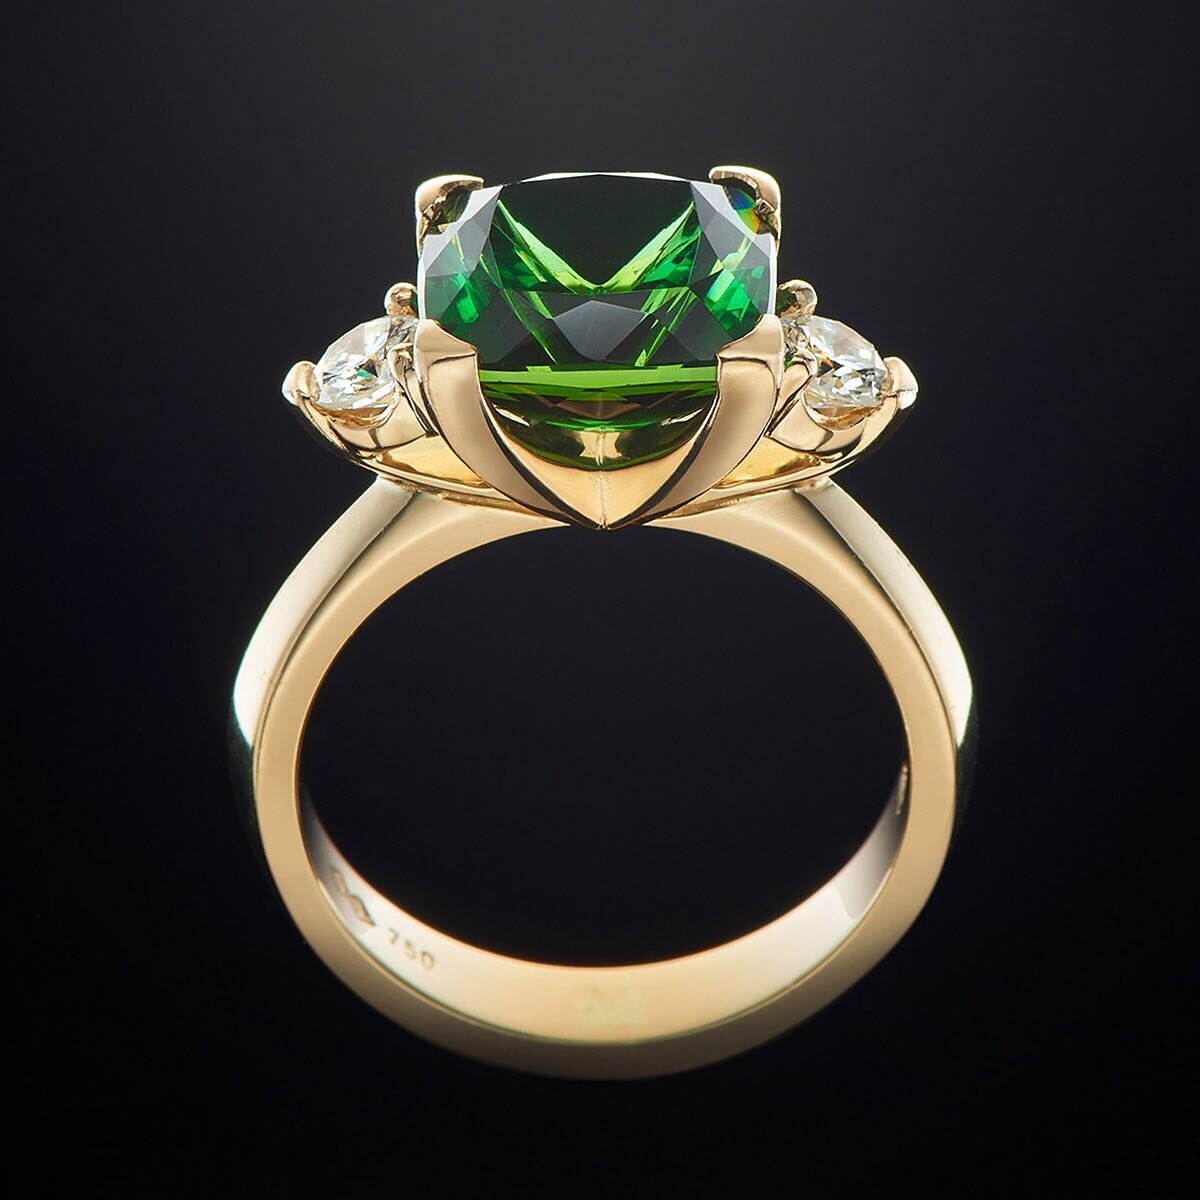 Keeping it simple. It&rsquo;s best to let excellent design &amp; craftsmanship dominate - no props required.
Emerald &amp; diamond ring by @aurumjewelsaustralia 
#aurumjewelsaustralia #jewellery #jewelleryphotography #customjewellery #ringphotography